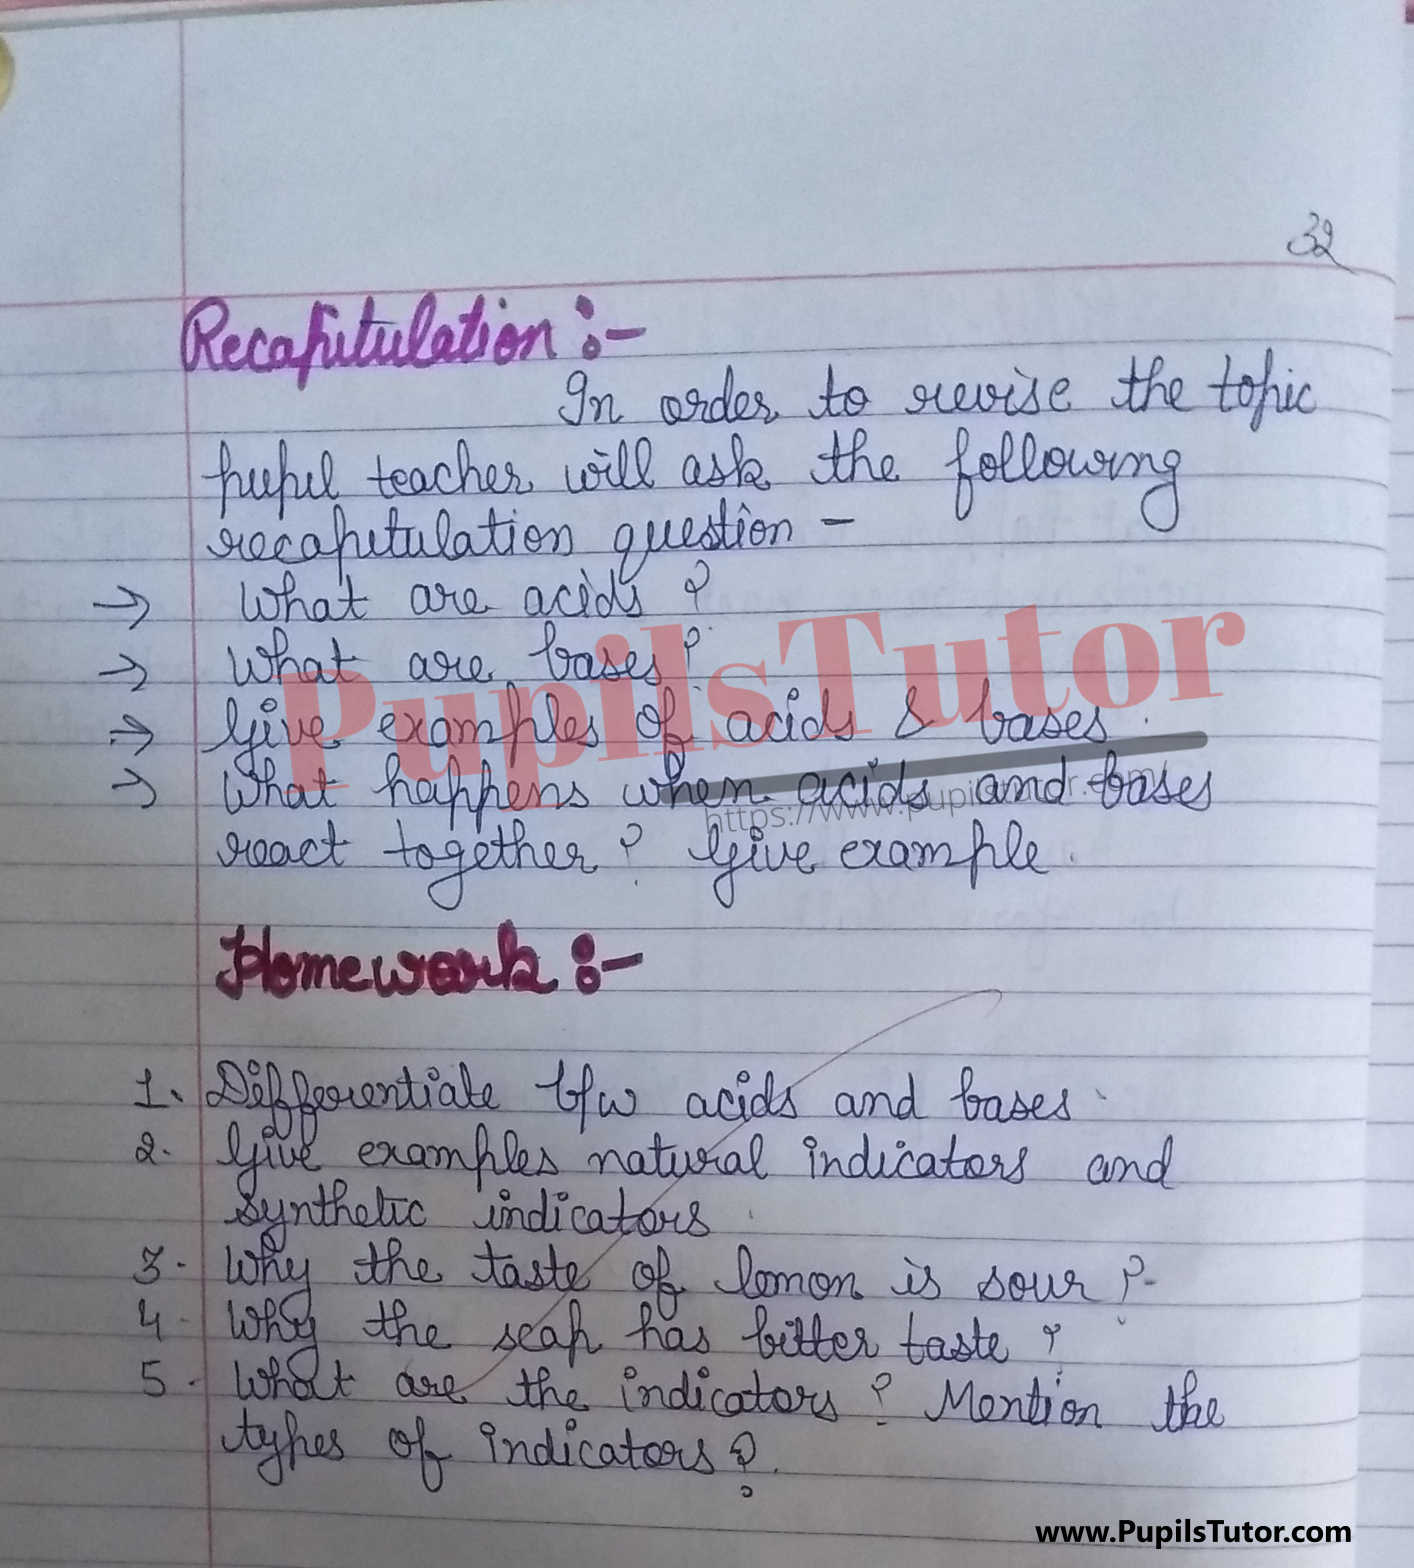 Real School Teaching And Practice 7 And 8th Class Free Chemistry Lesson Plan Acid Base Reaction [Page And Image Number 7] – www.pupilstutor.com